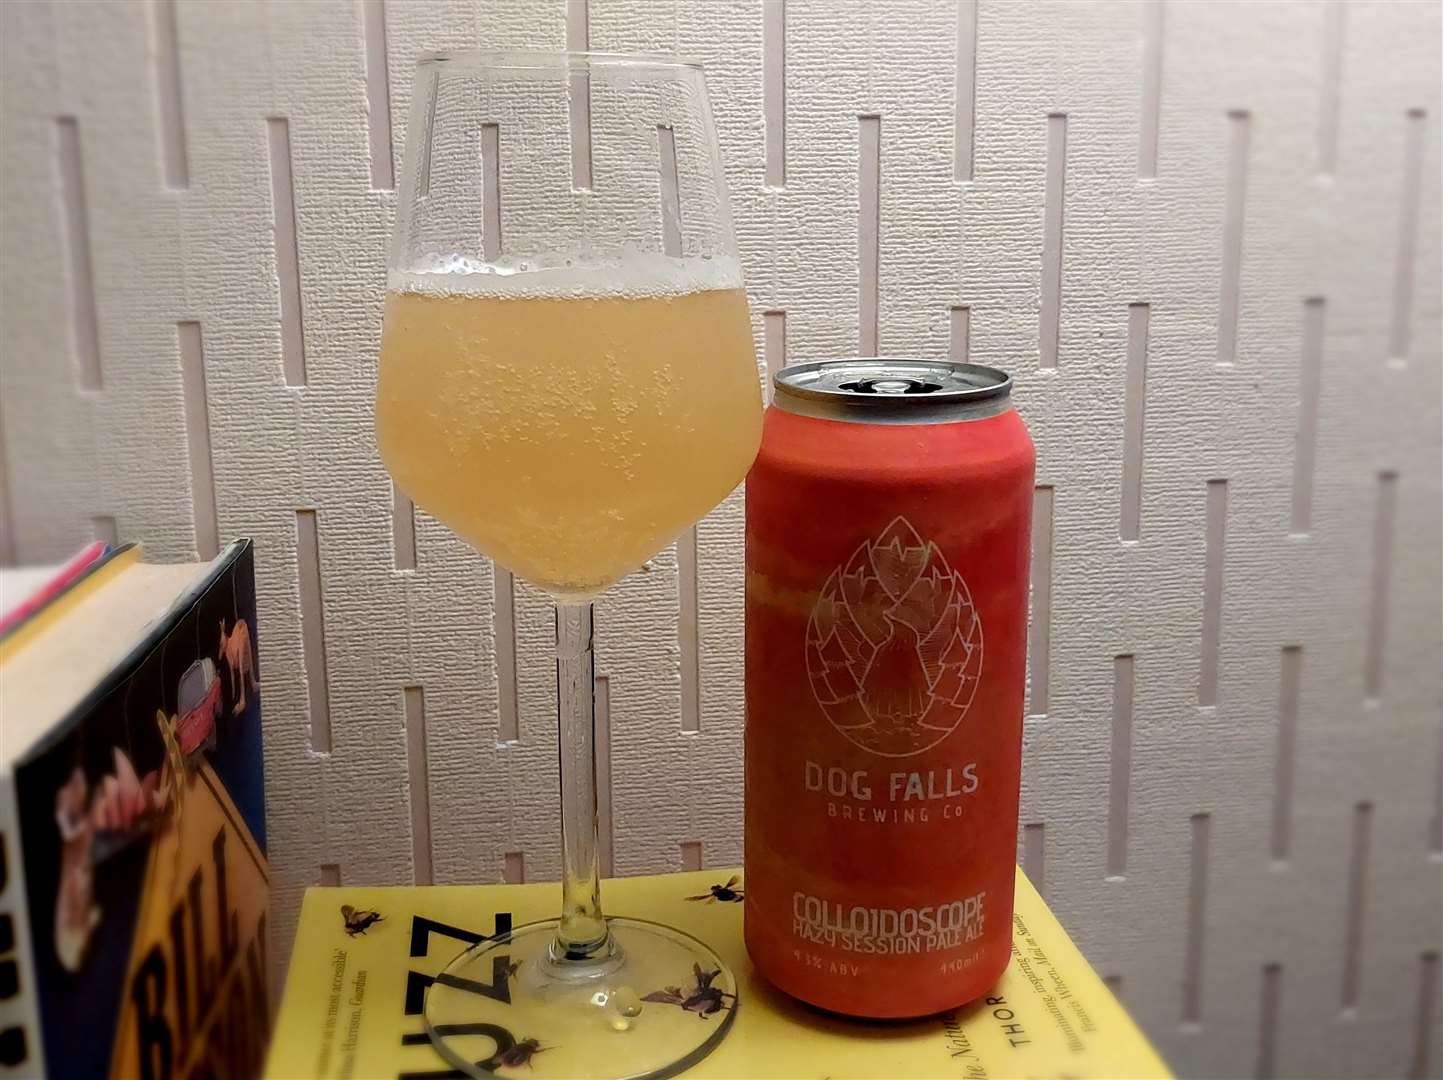 Dog Falls Brewing first national gold in 2020 was Colloidoscope, a crisp Hazy Session Pale Ale.